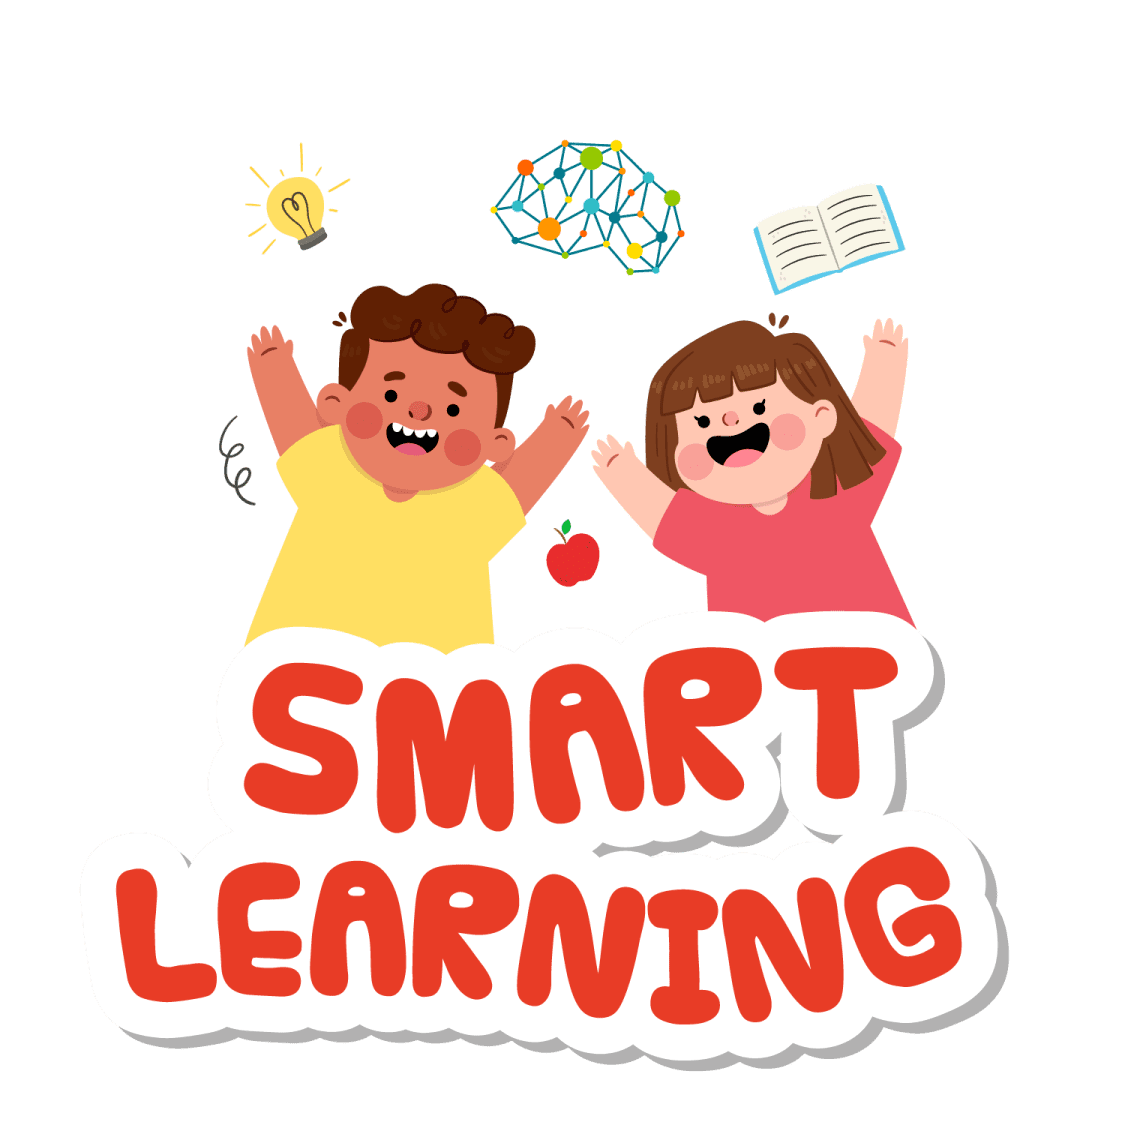 Smart Learning (Mind Map)